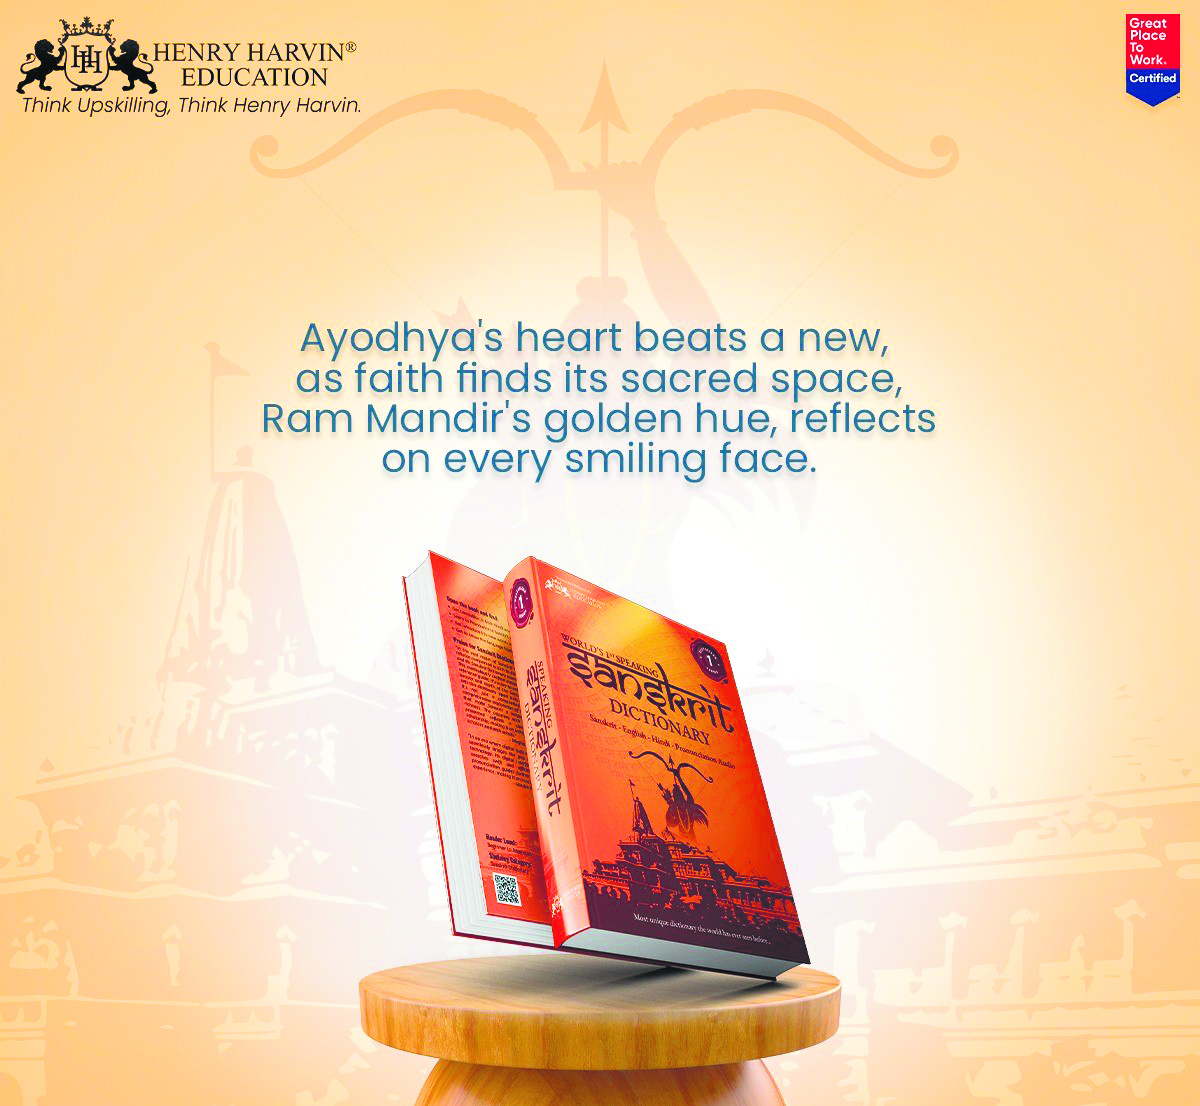 Henry Harvin Education unveils the world’s 1st Sanskrit-speaking dictionary to pay tribute to lord Ram